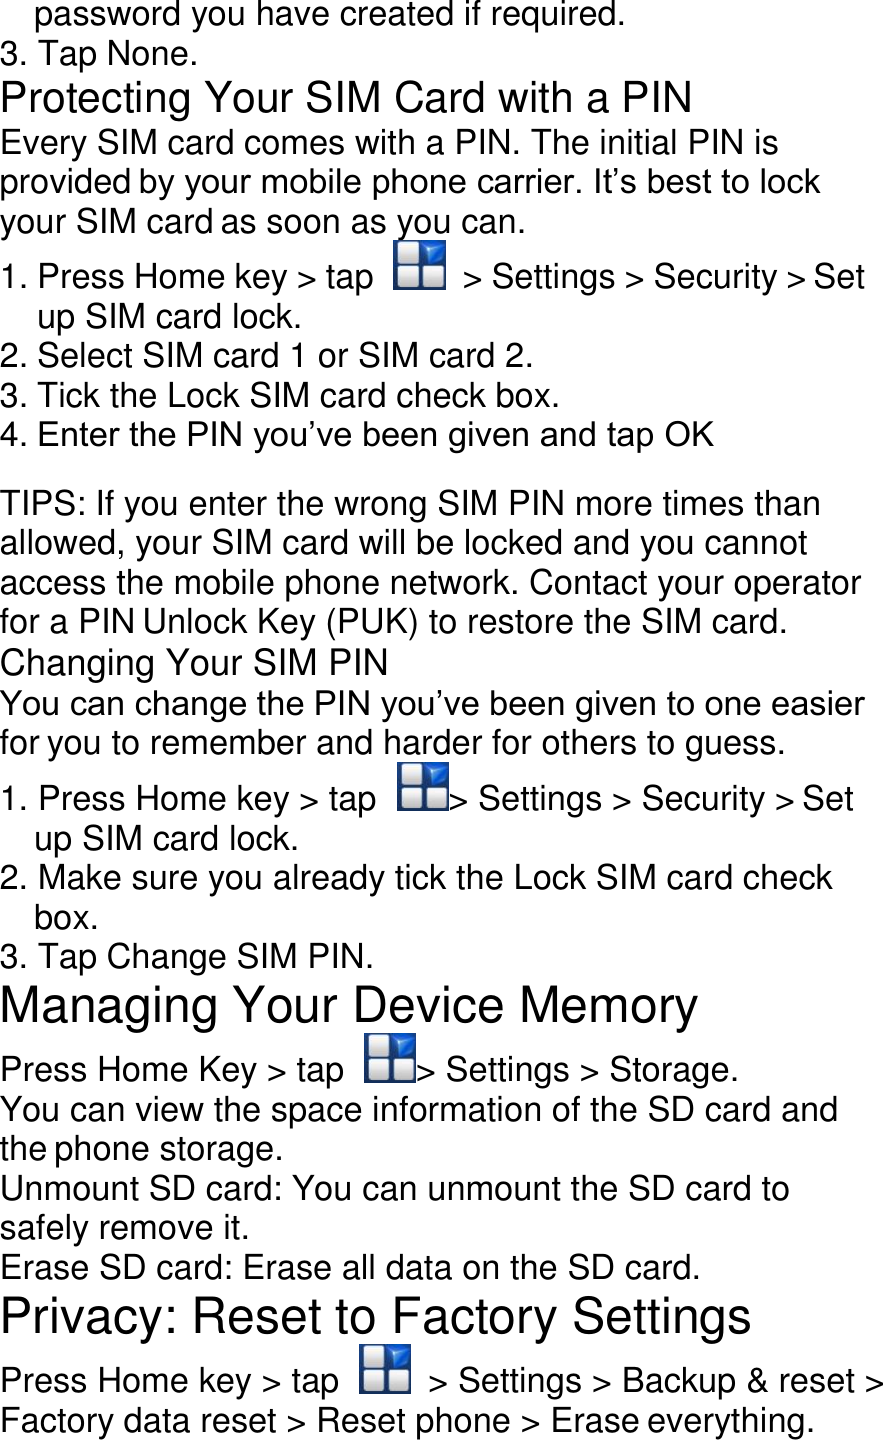 password you have created if required. 3. Tap None. Protecting Your SIM Card with a PIN Every SIM card comes with a PIN. The initial PIN is provided by your mobile phone carrier. It’s best to lock your SIM card as soon as you can. 1. Press Home key &gt; tap    &gt; Settings &gt; Security &gt; Set up SIM card lock. 2. Select SIM card 1 or SIM card 2. 3. Tick the Lock SIM card check box. 4. Enter the PIN you’ve been given and tap OK  TIPS: If you enter the wrong SIM PIN more times than allowed, your SIM card will be locked and you cannot access the mobile phone network. Contact your operator for a PIN Unlock Key (PUK) to restore the SIM card. Changing Your SIM PIN You can change the PIN you’ve been given to one easier for you to remember and harder for others to guess. 1. Press Home key &gt; tap  &gt; Settings &gt; Security &gt; Set up SIM card lock. 2. Make sure you already tick the Lock SIM card check box. 3. Tap Change SIM PIN. Managing Your Device Memory Press Home Key &gt; tap  &gt; Settings &gt; Storage. You can view the space information of the SD card and the phone storage. Unmount SD card: You can unmount the SD card to safely remove it. Erase SD card: Erase all data on the SD card. Privacy: Reset to Factory Settings Press Home key &gt; tap    &gt; Settings &gt; Backup &amp; reset &gt; Factory data reset &gt; Reset phone &gt; Erase everything. 